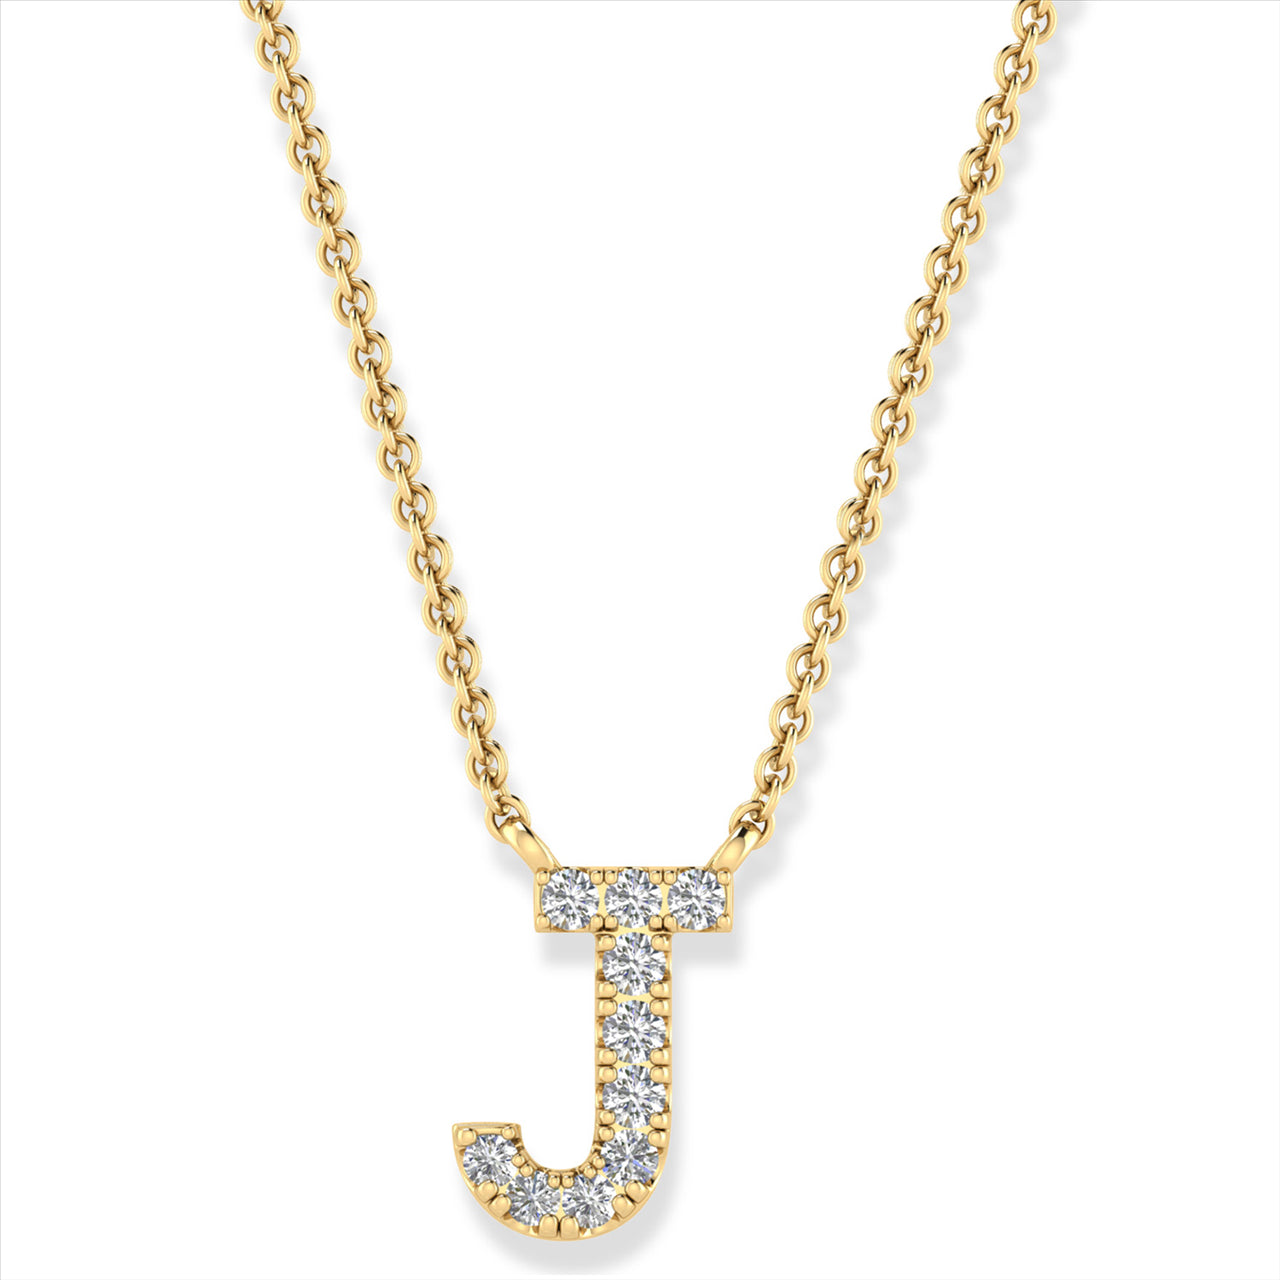 Diamond Set "J" Initial Necklace in 9 carat Yellow Gold